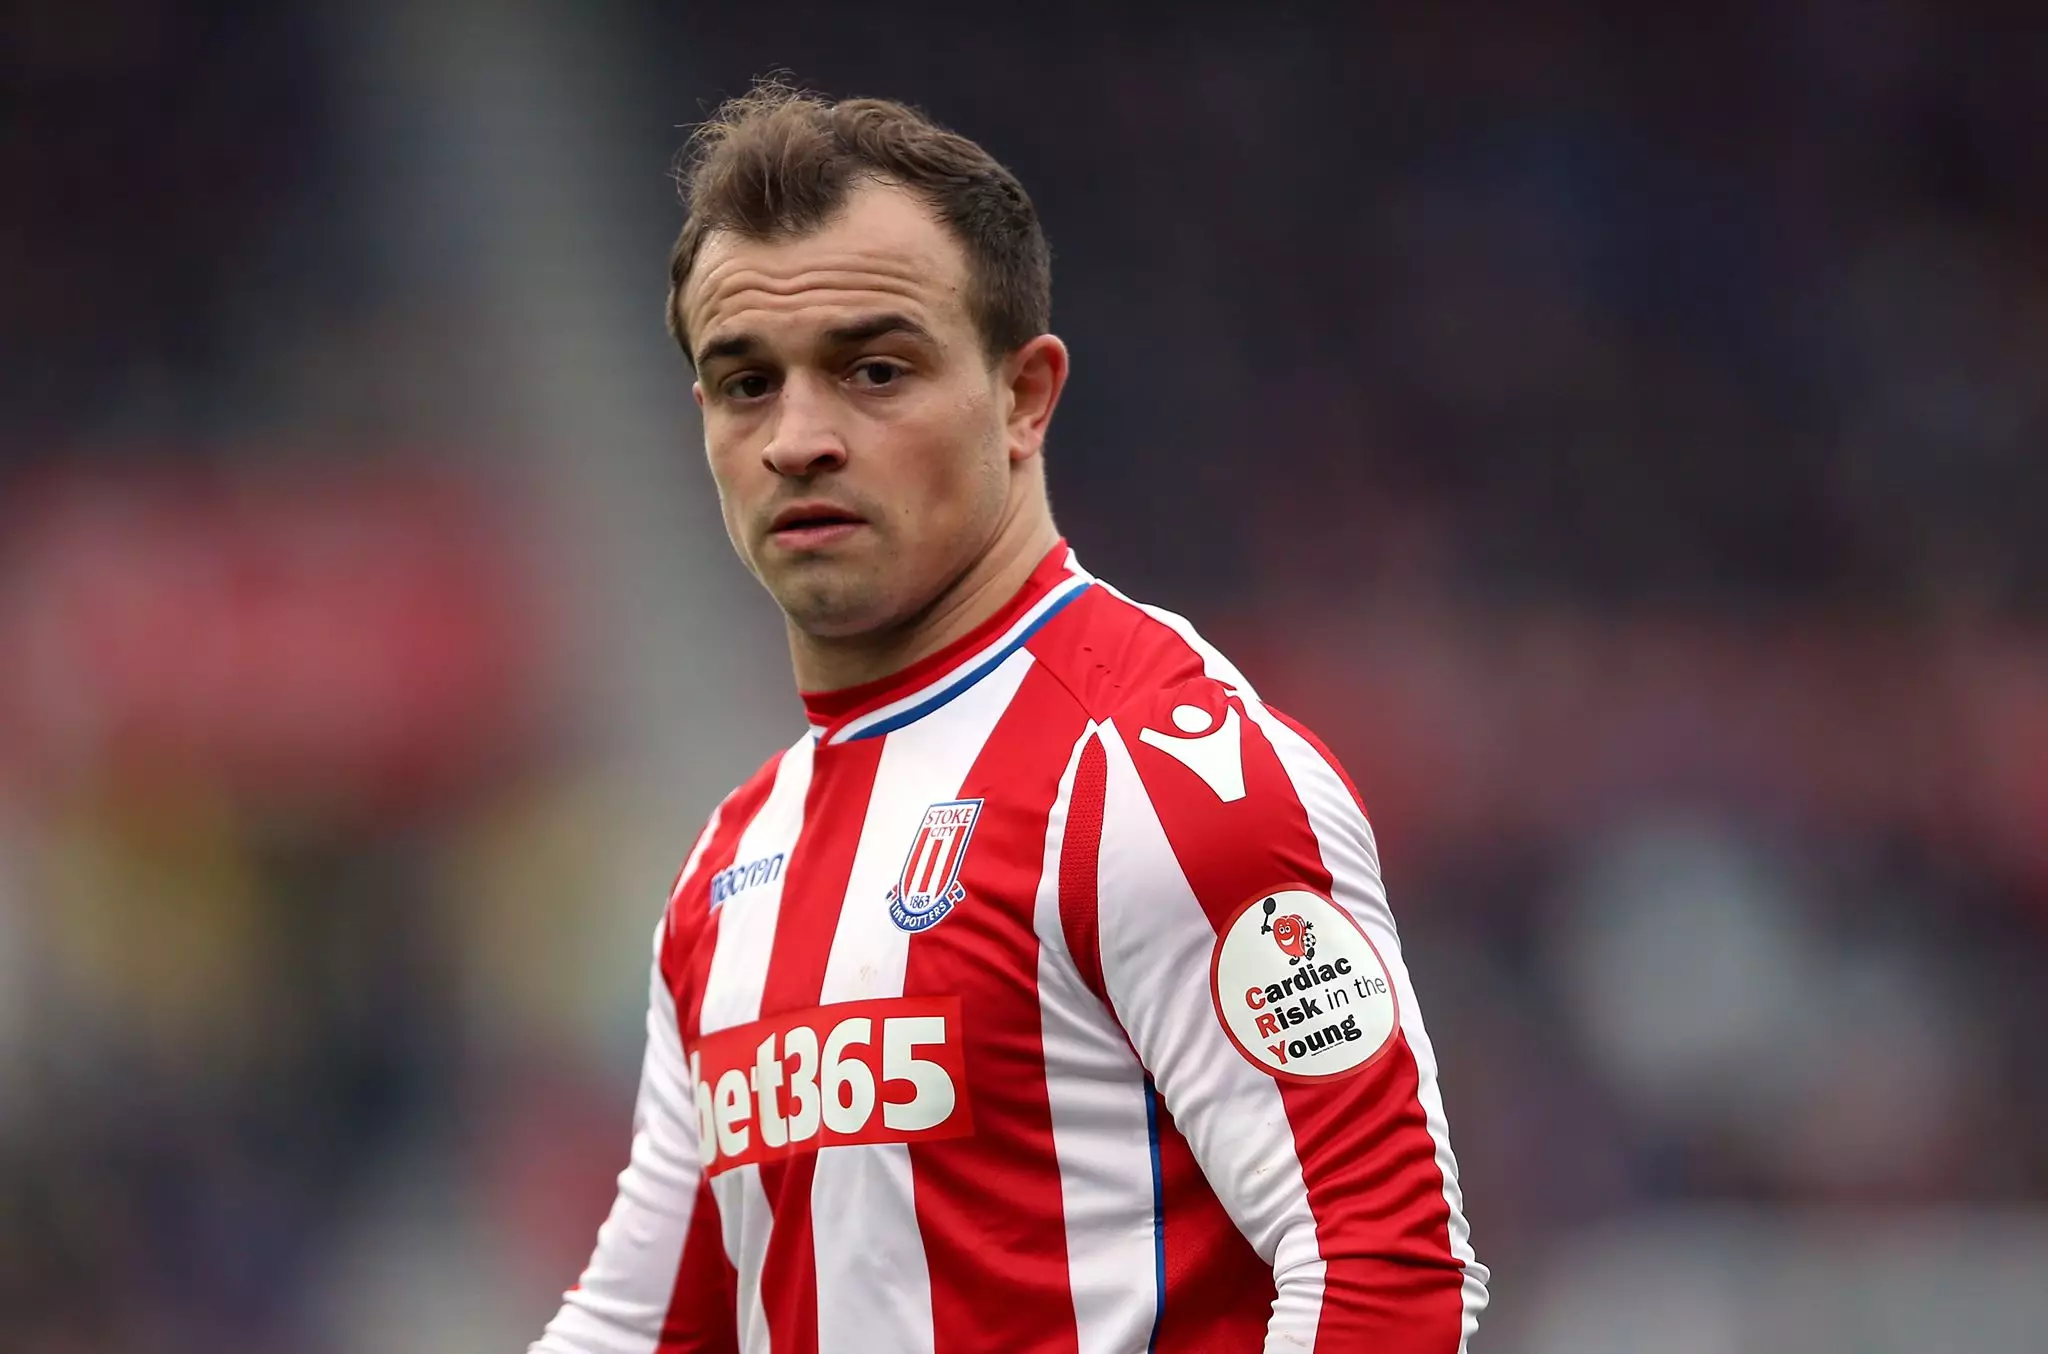 Shaqiri in action for Stoke. Image: PA